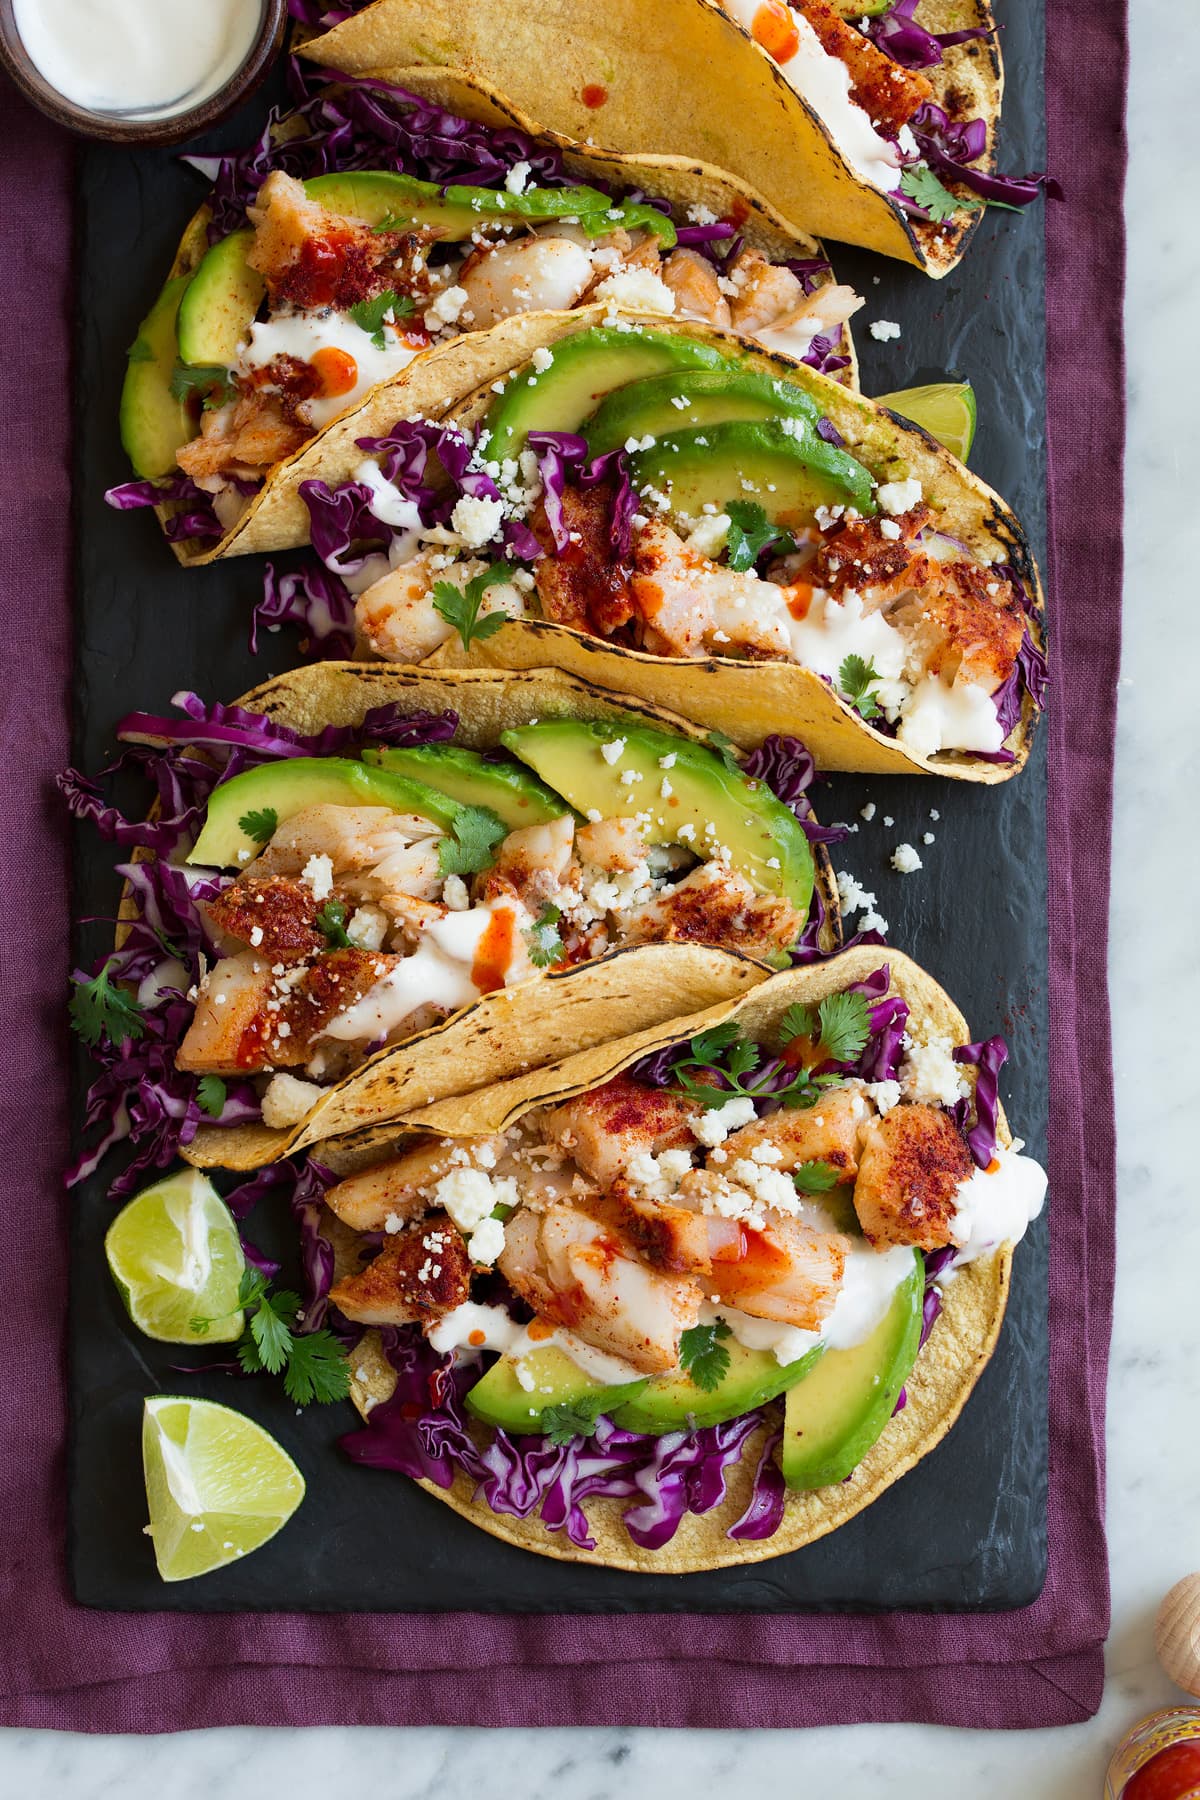 Fish Tacos Recipe {Baked, Grilled or Pan Seared} - Cooking Classy